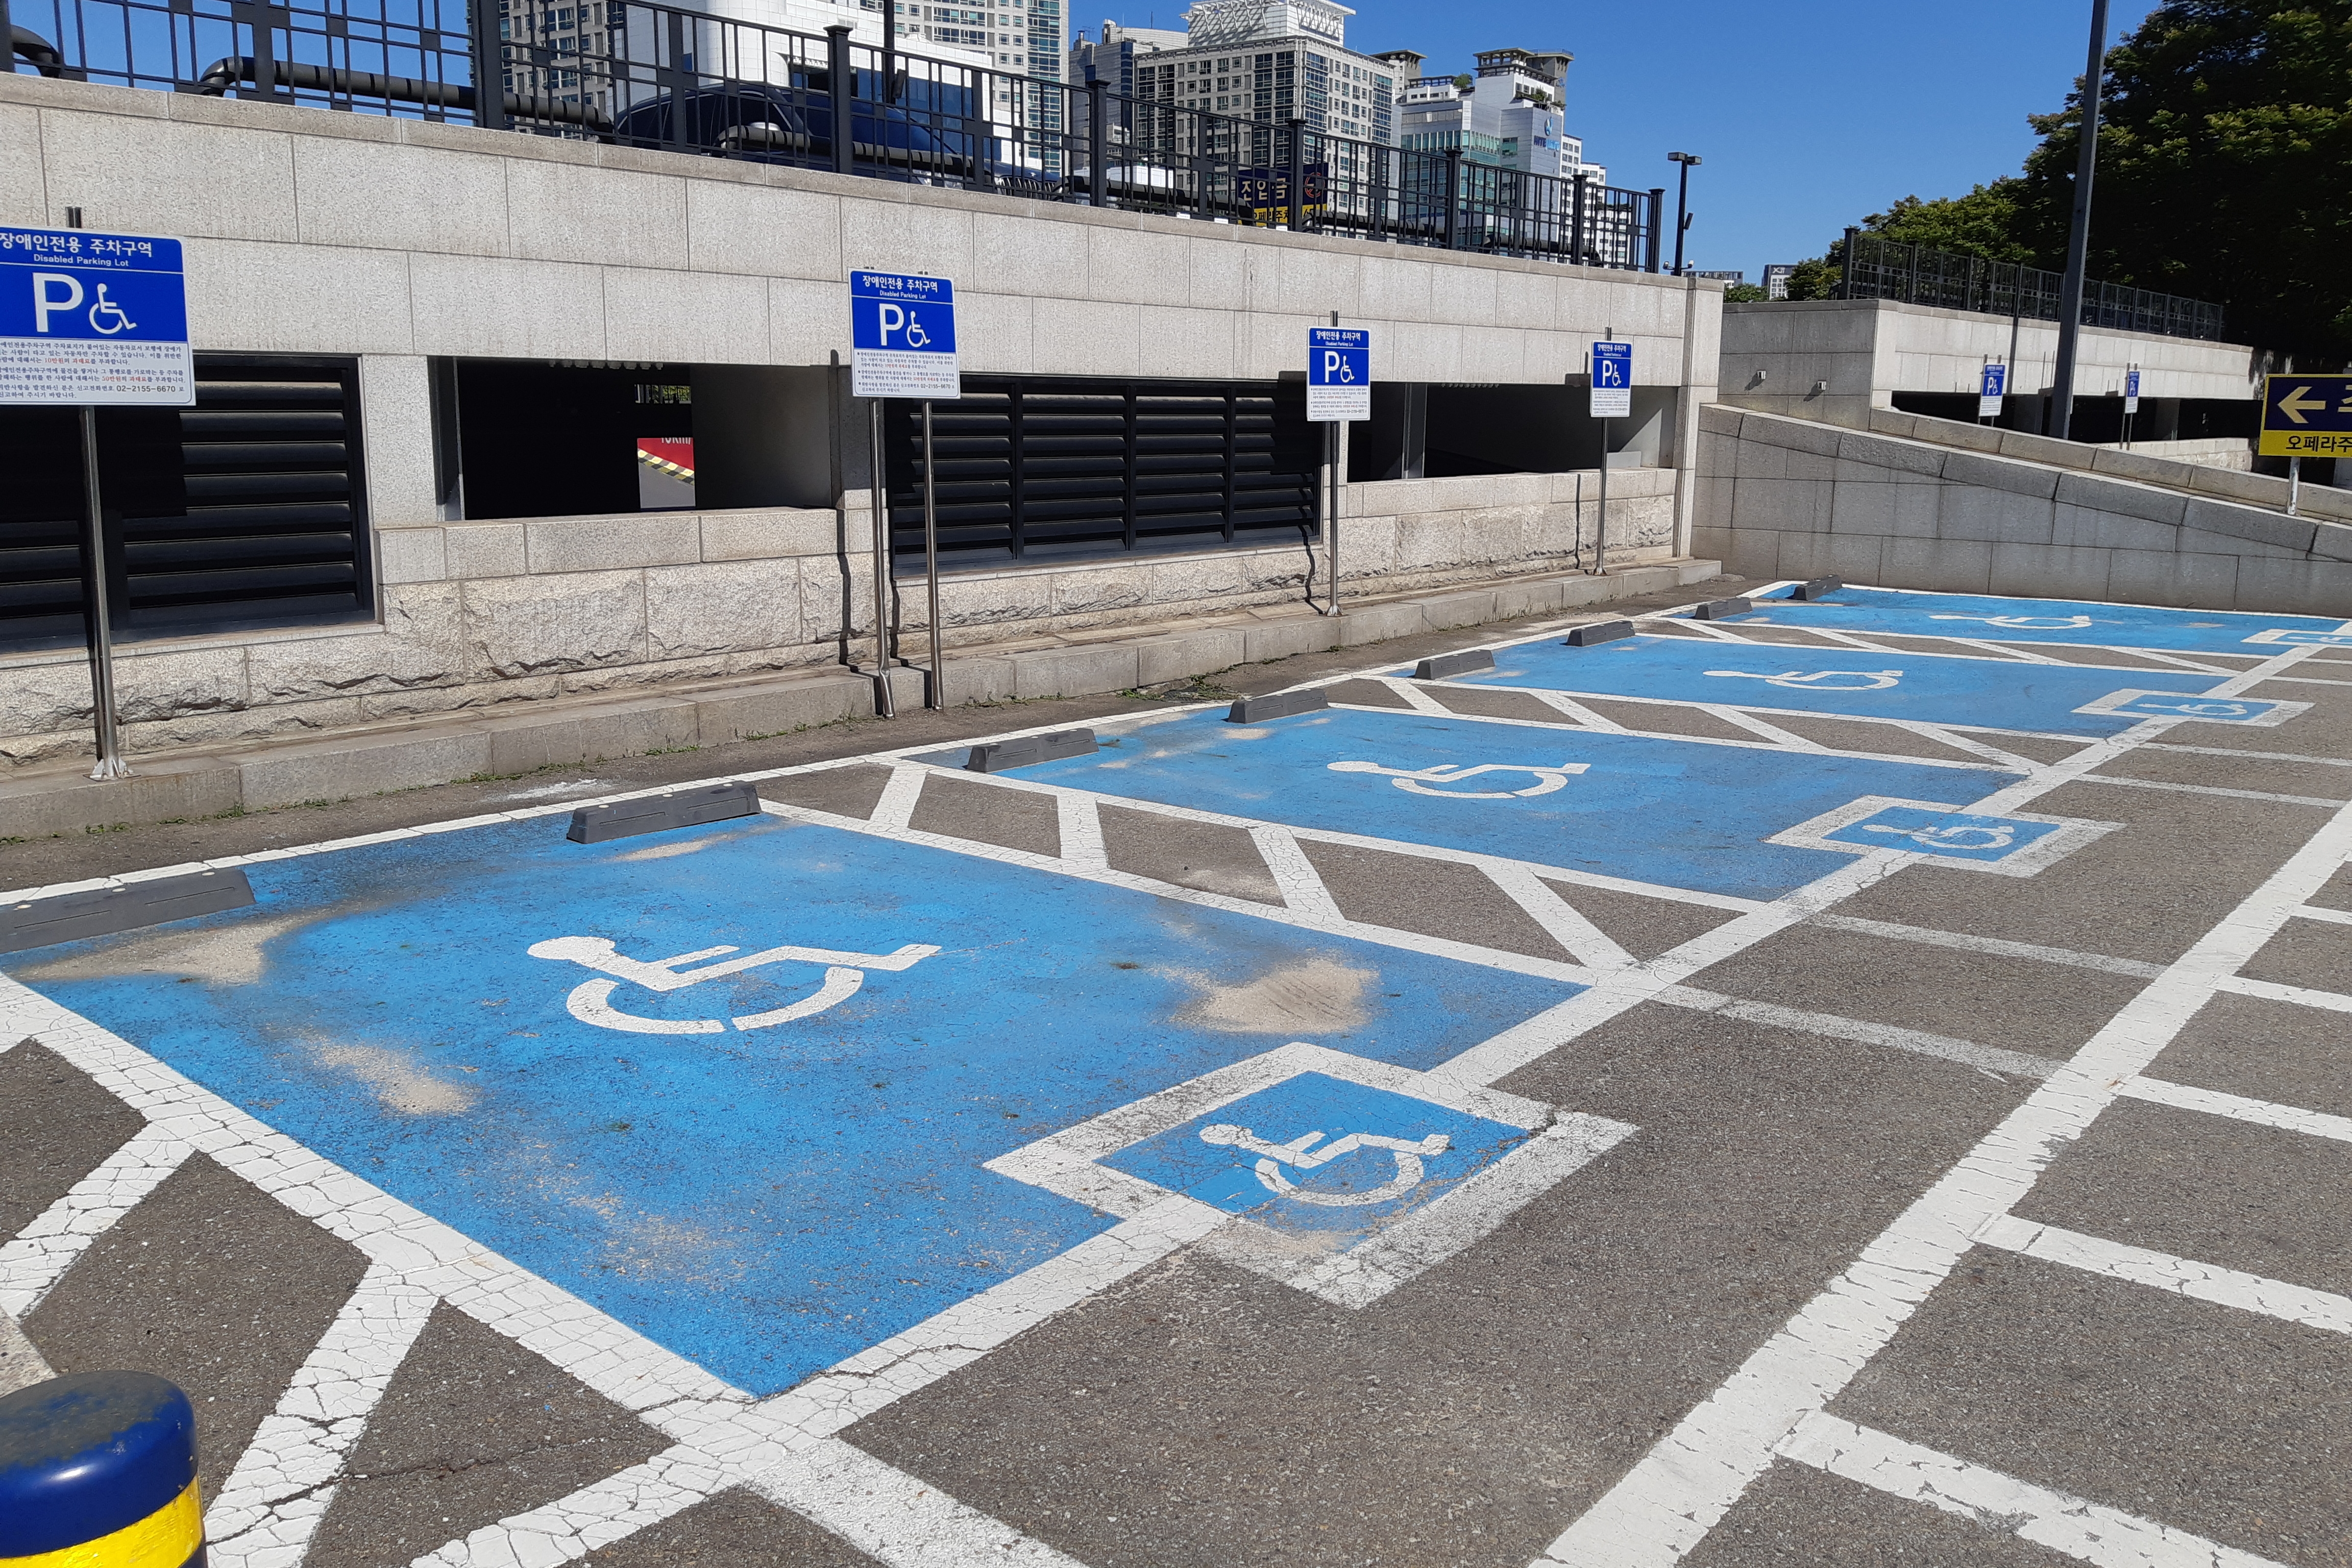 Parking facilities for persons with disabilities0 : The spacious outdoor parking facilities for persons with disabilities 